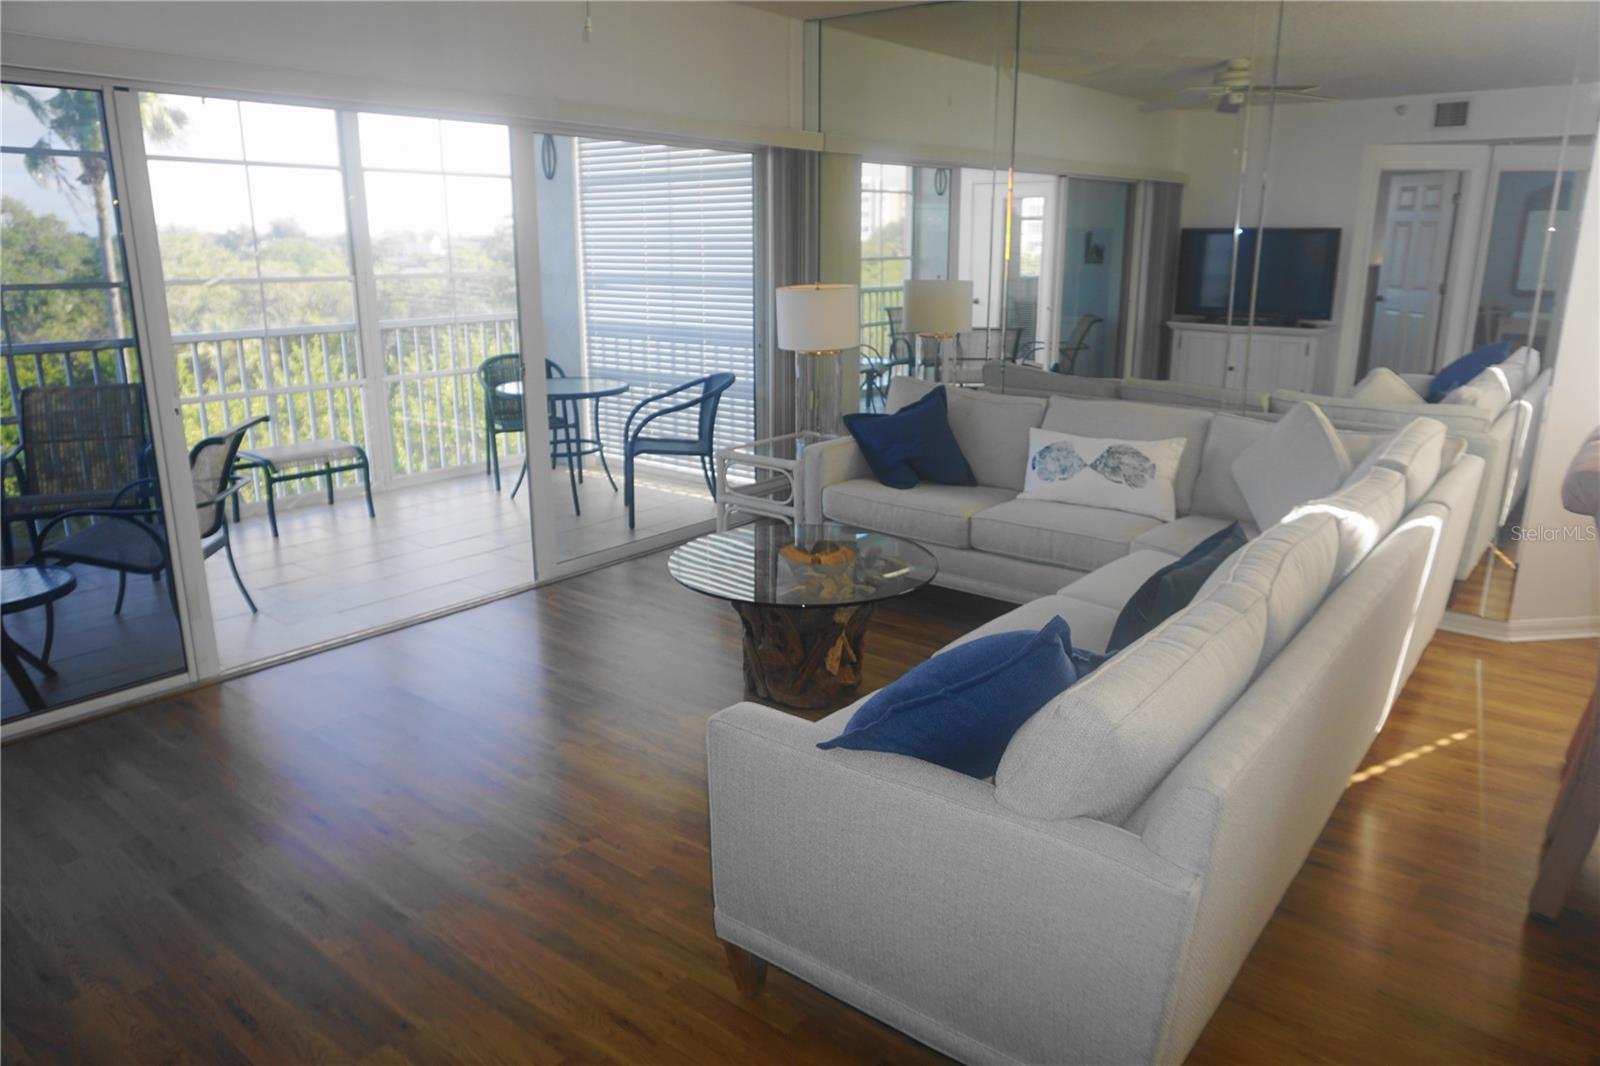 The living room with entry to the lanai overlooking the lake & bayou